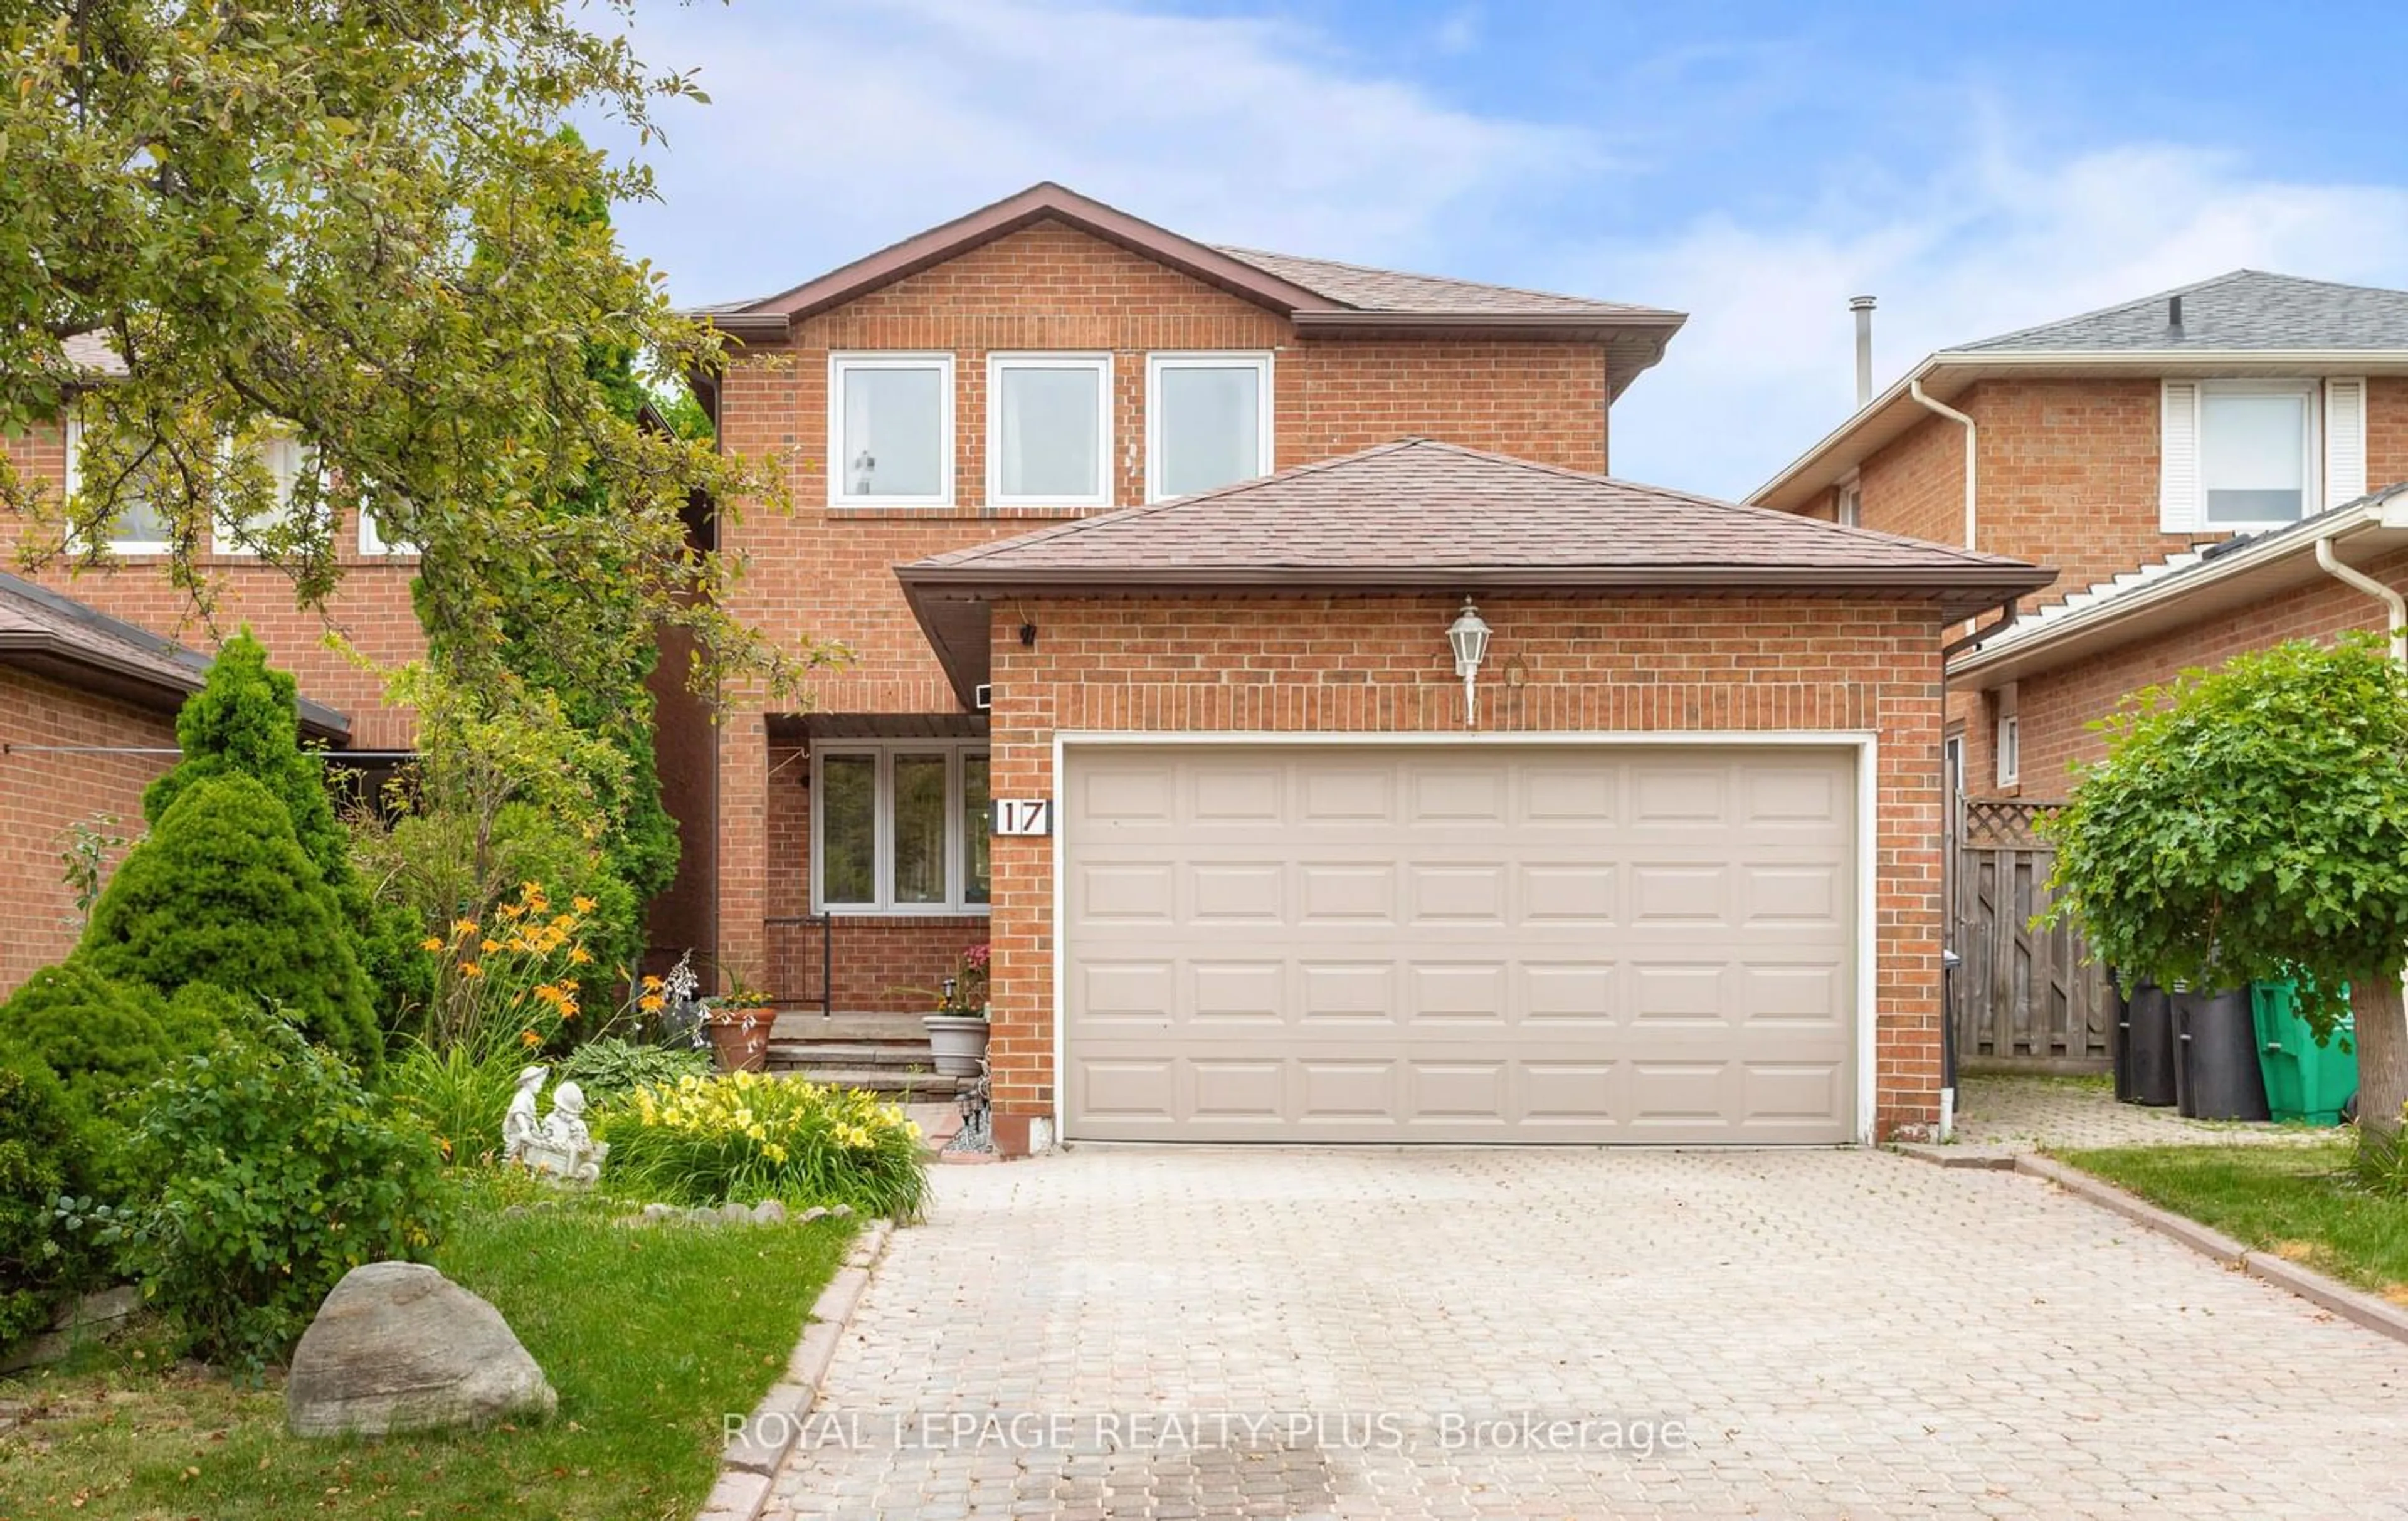 Home with brick exterior material for 17 Hanson Rd, Mississauga Ontario L5B 2E3